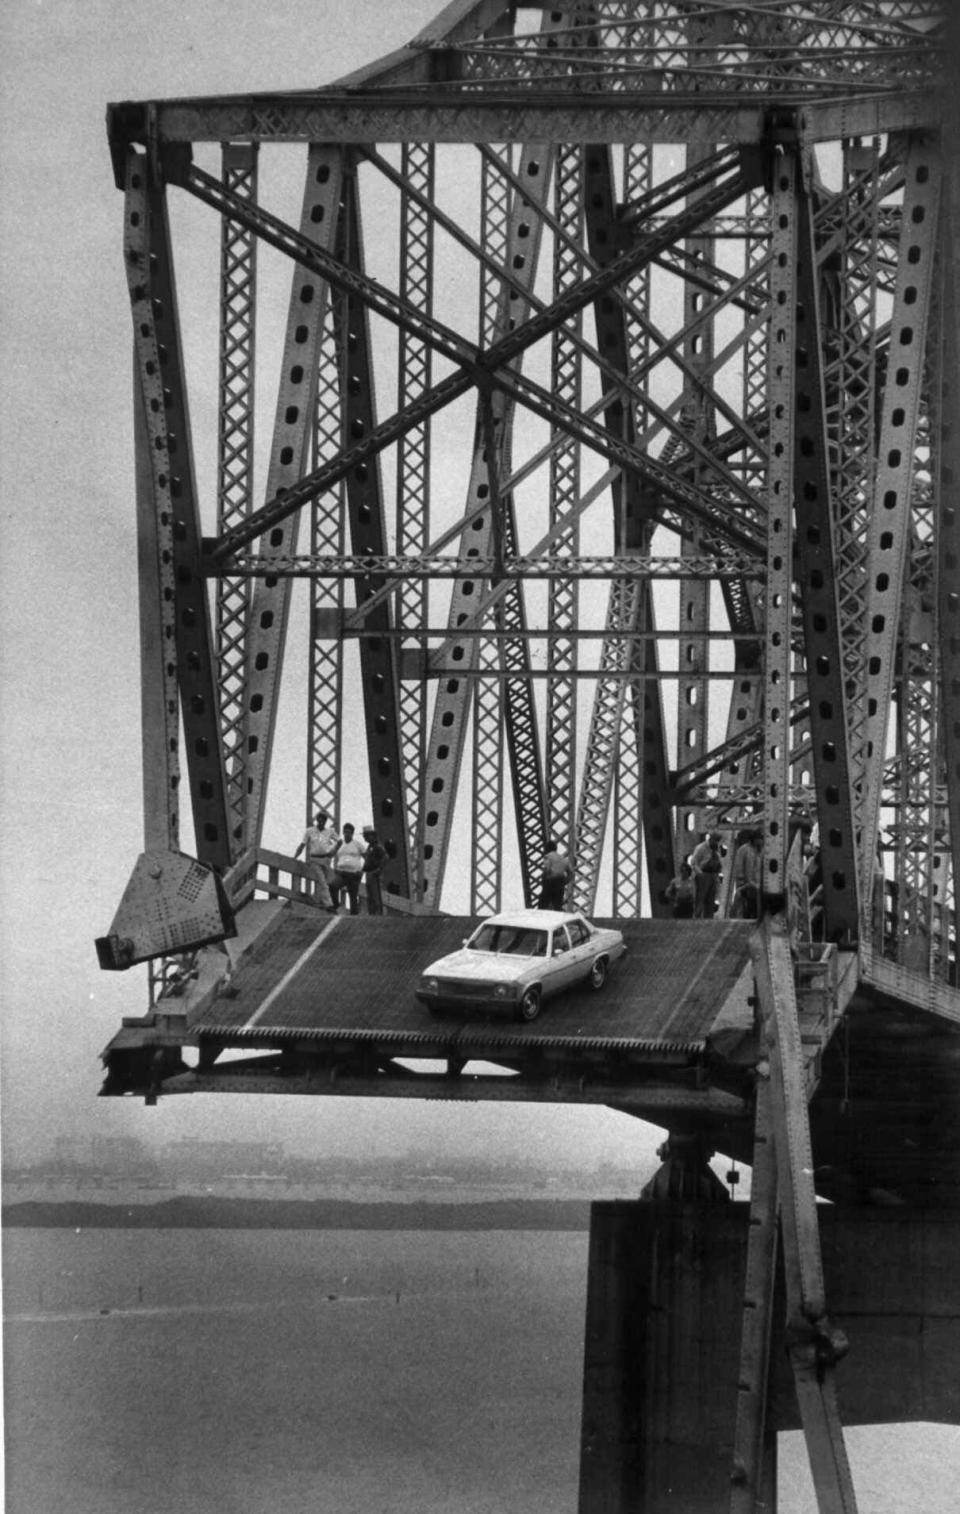 The car driven by Richard Hornbuckle was inches from disaster in 1980 but managed to stop on the wrecked Old Sunshine Skyway Bridge. The freighter Summit Venture slammed into the bridge and a 1,200-foot chunk of concrete roadway crashed into the waters of Tampa Bay, taking a truck, seven cars and a bus with it. Thirty-five people died.